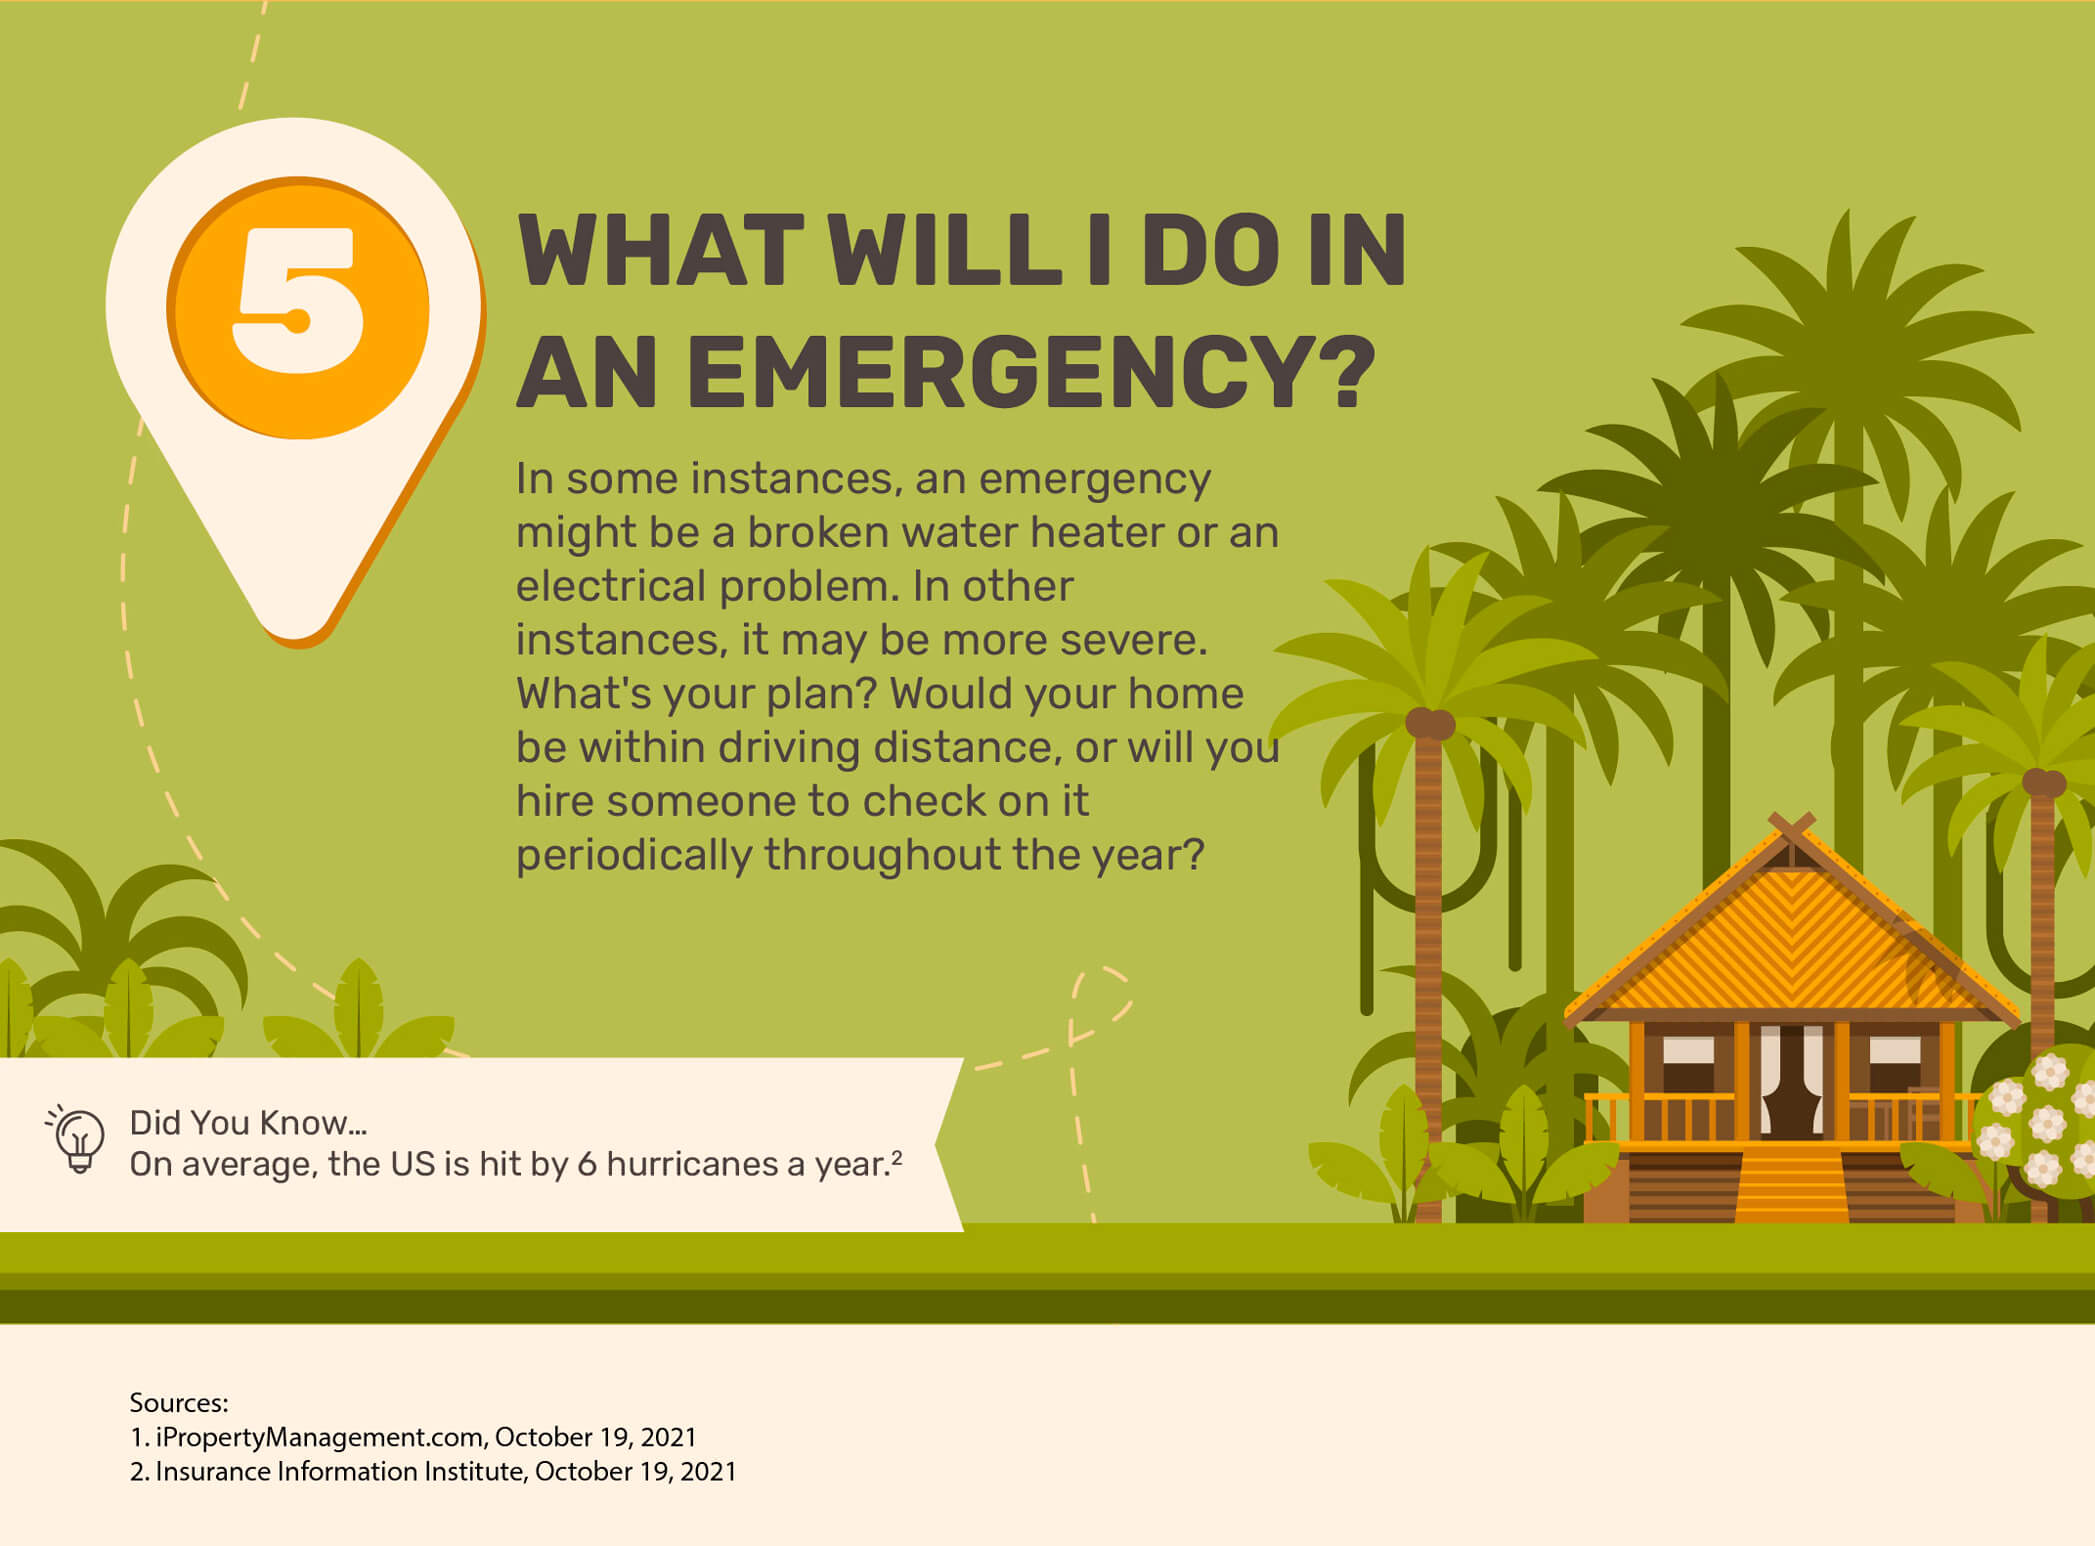 5. What Will I Do in an Emergency? In some instances, an emergency might be a broken water heater or an electrical problem. In other instances, it may be more severe. What's your plan? Would your home be within driving distance, or will you hire someone to check on it periodically throughout the year? Did you know on average, the US is hit by 6 hurricanes a year. Source 2. Sources: iPropertyManagement.com, October 19, 2021, Insurance Information Institute, October 19, 2021.